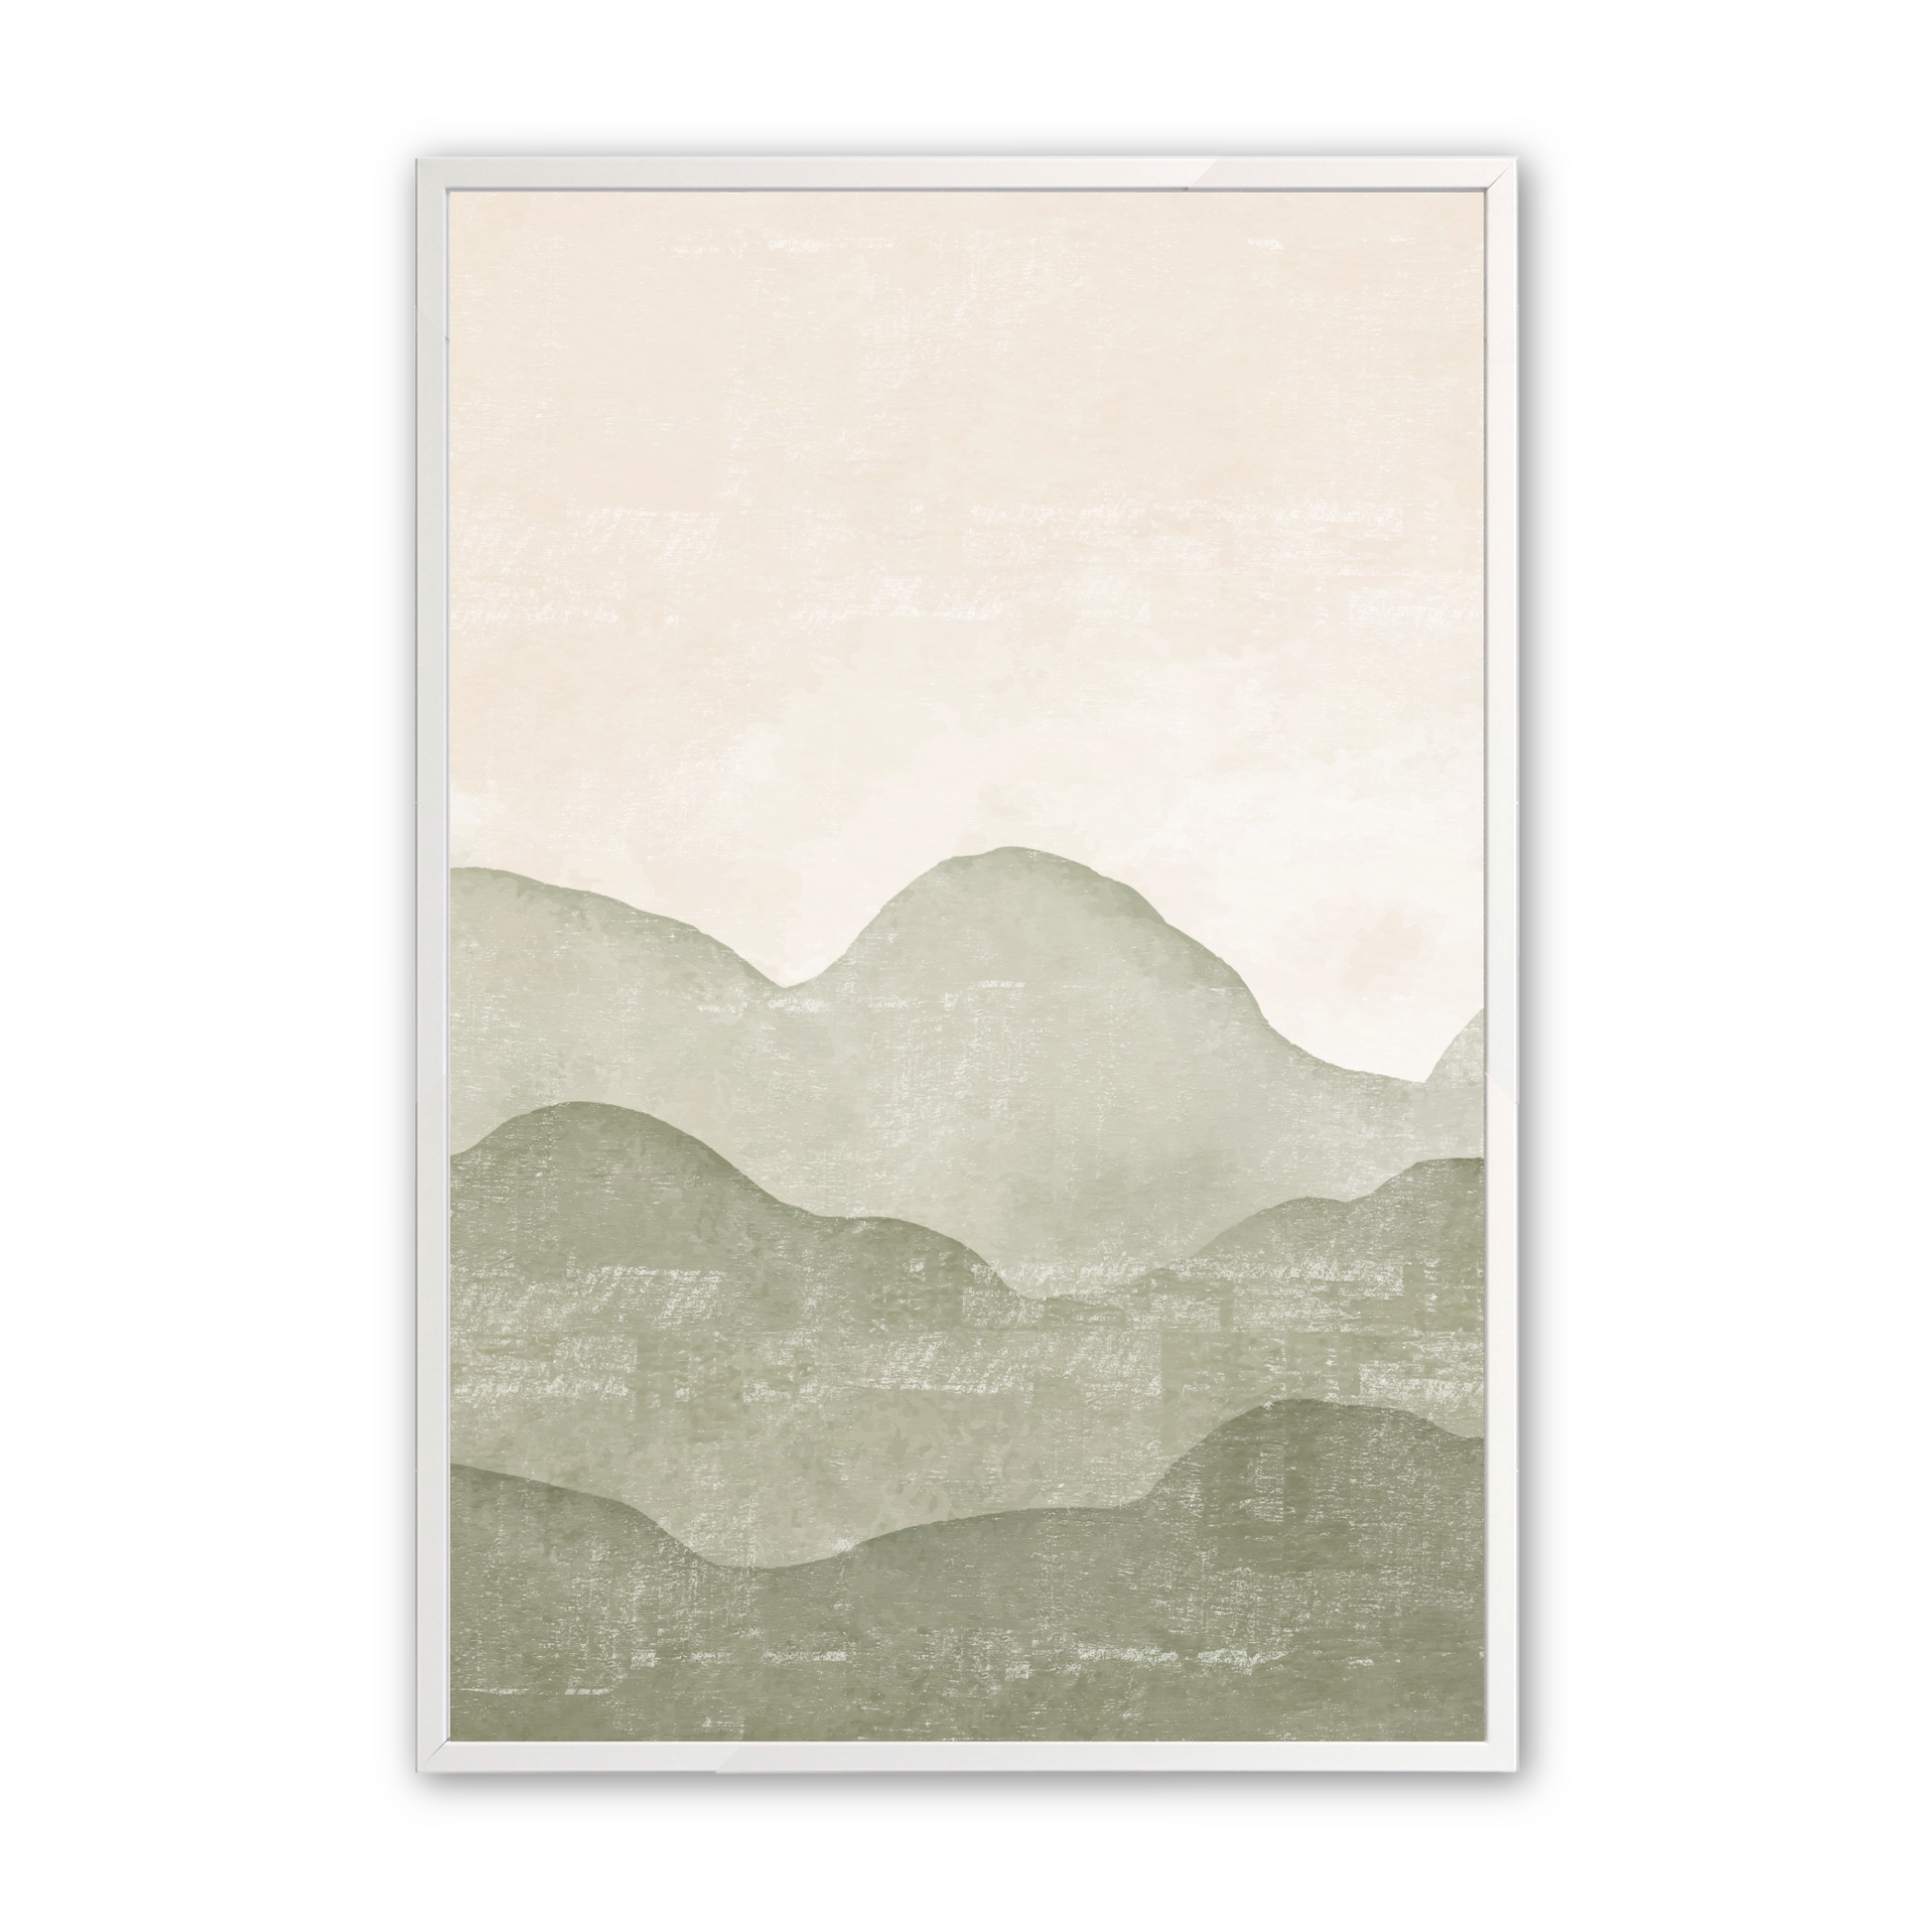 [color:Opaque White], Picture of the second of 3 mountain illustrations in white frame